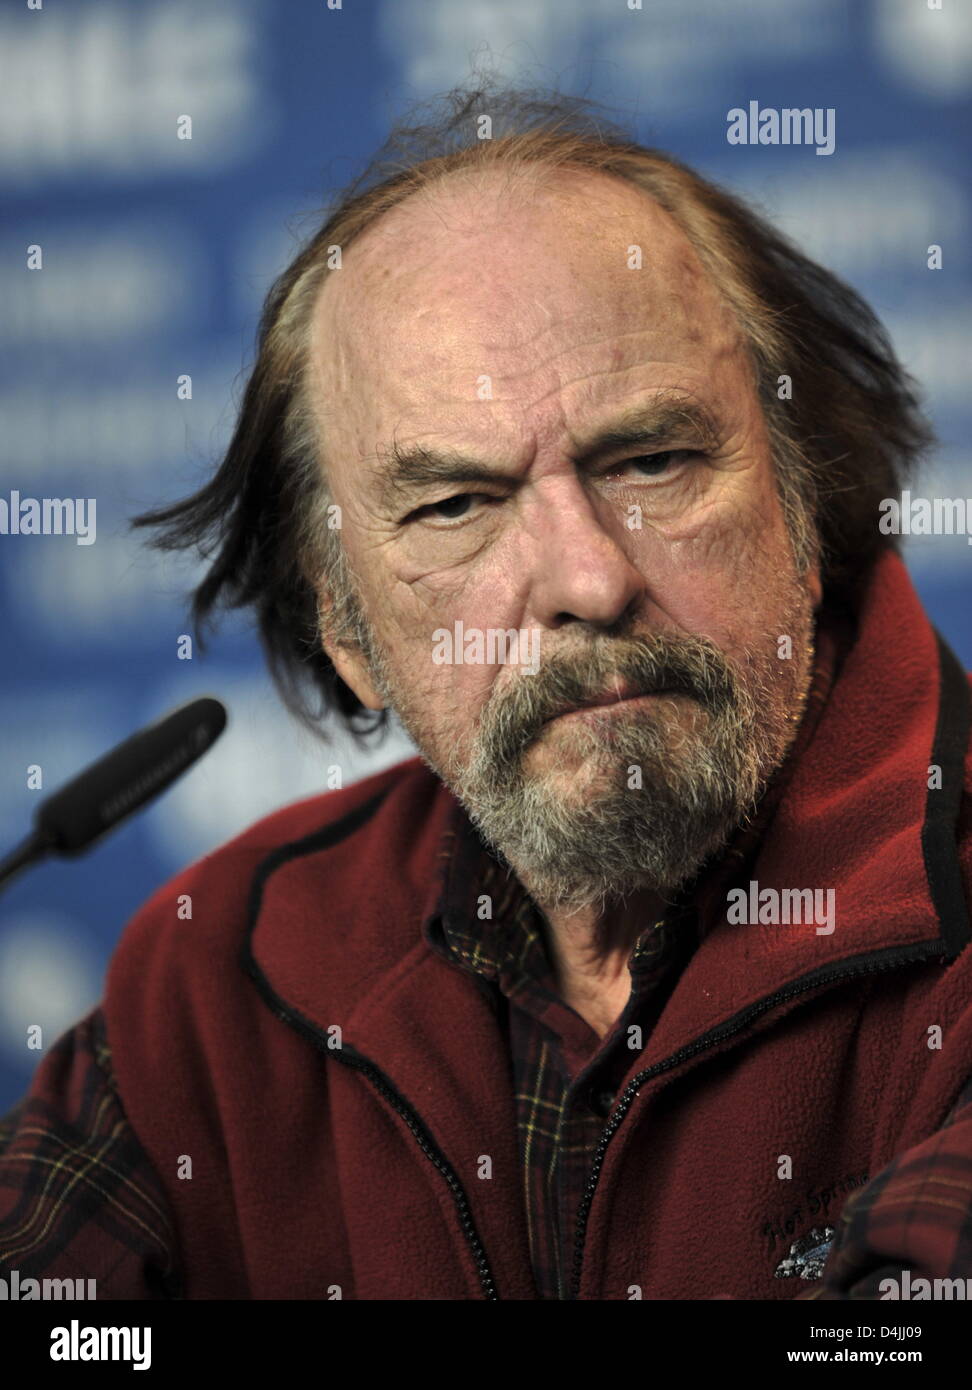 US actor Rip Torn pictured during the press conference of the film ?Happy Tears? at the 59th Berlin International Film Festival in Berlin, Germany, 11 February 2009. The film is among the 18 films competing for the Silver and Golden Bear awards at the 59th Berlinale. Winners will be announced on 14 February. Photo: Gero Breloer Stock Photo